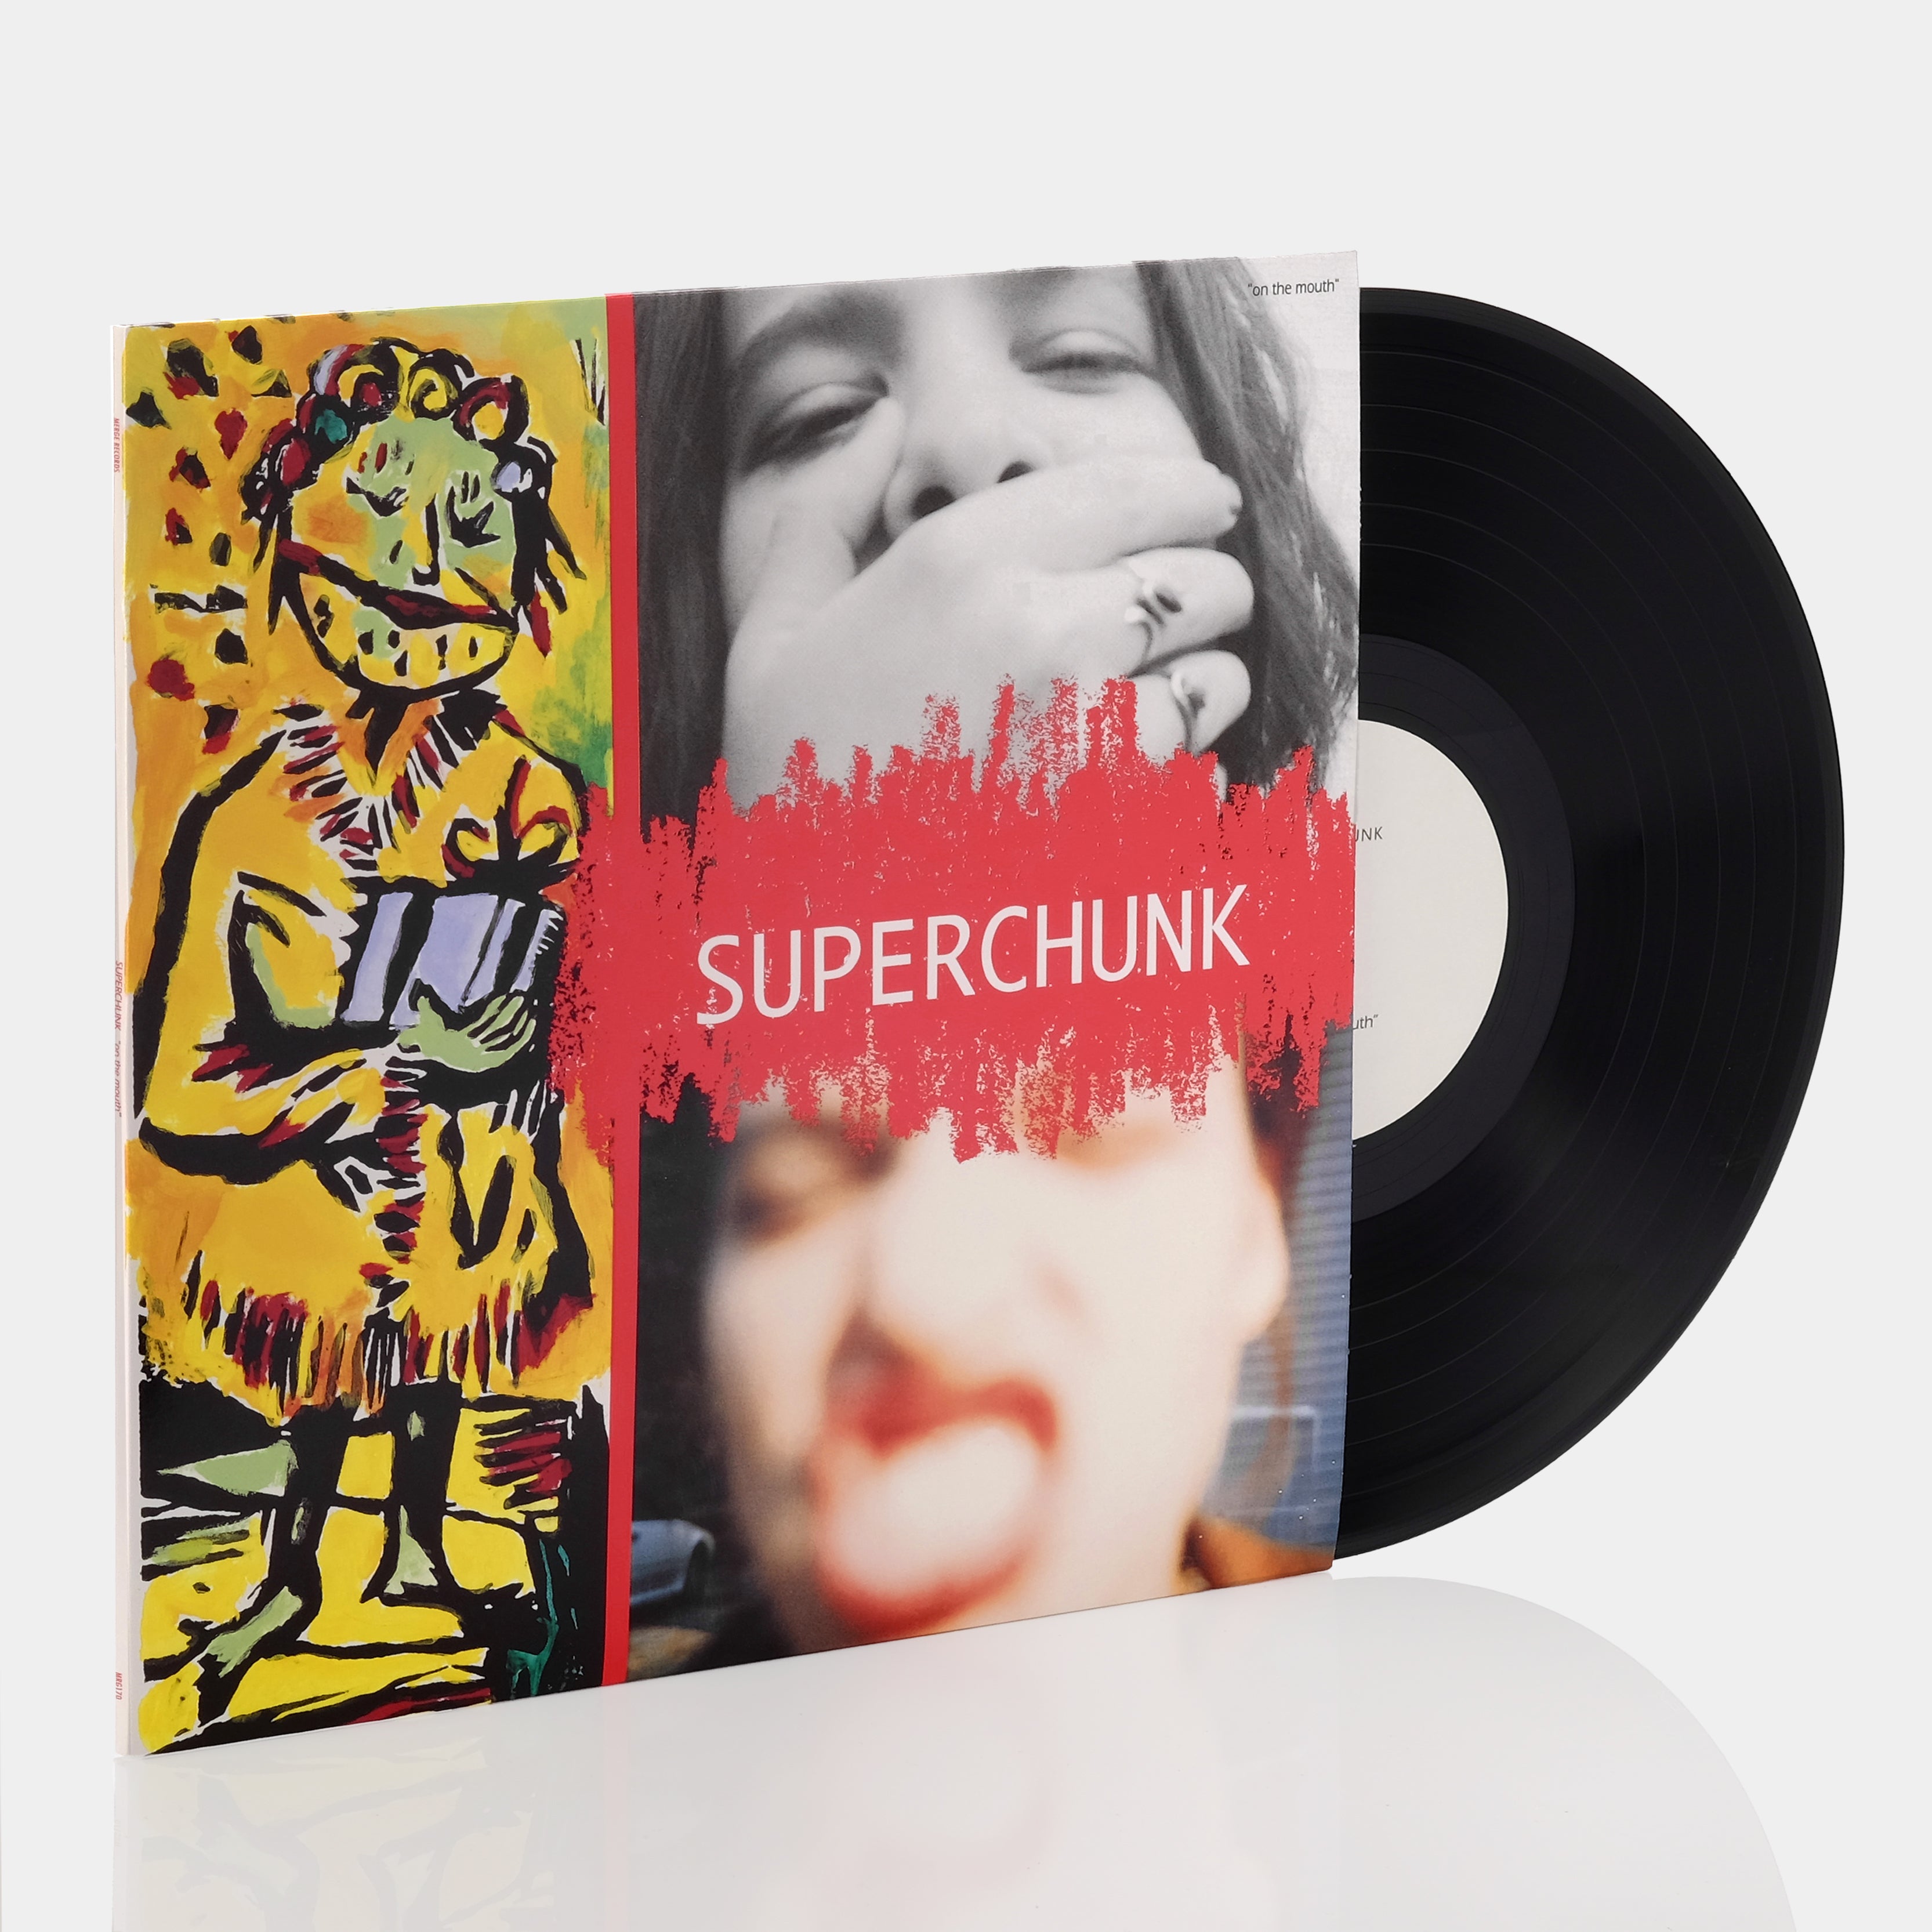 Superchunk - On The Mouth LP Vinyl Record